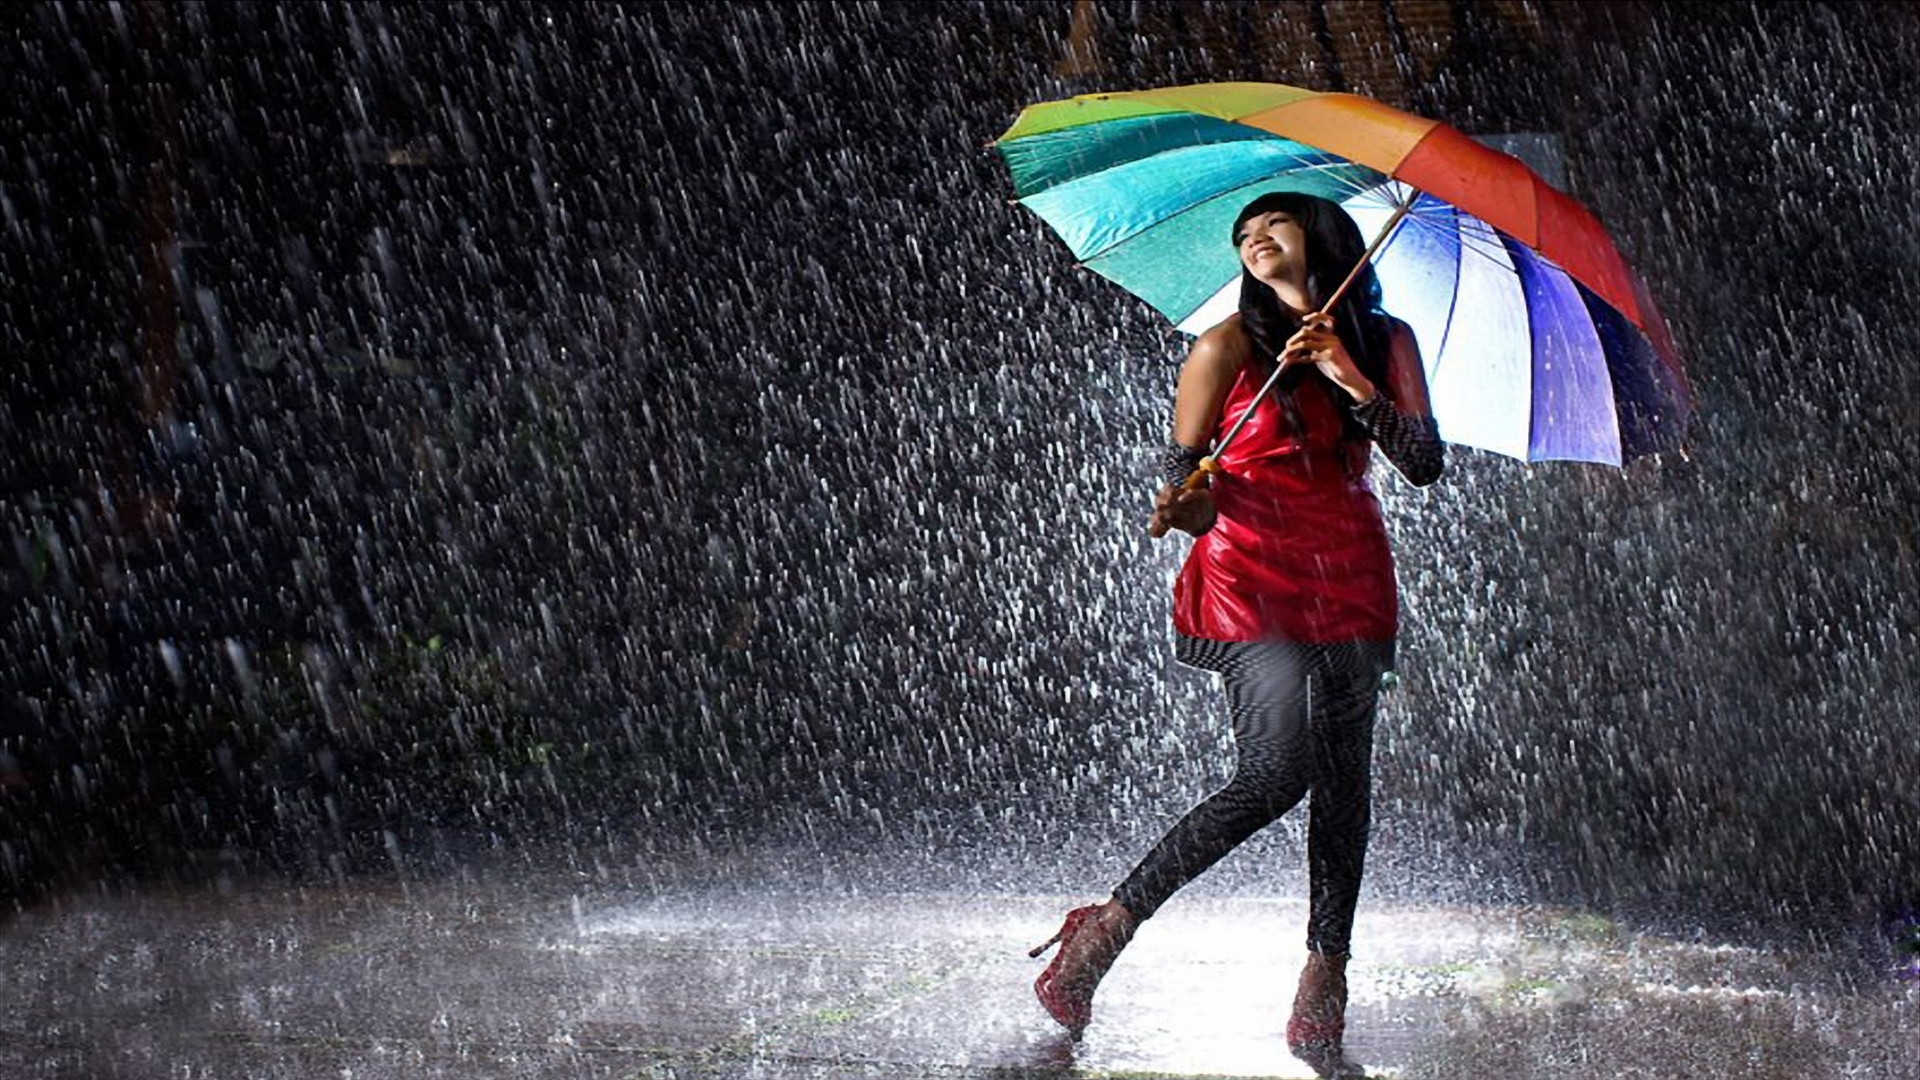 Rainy Night HD Wallpaper Pictures Image Background Photos